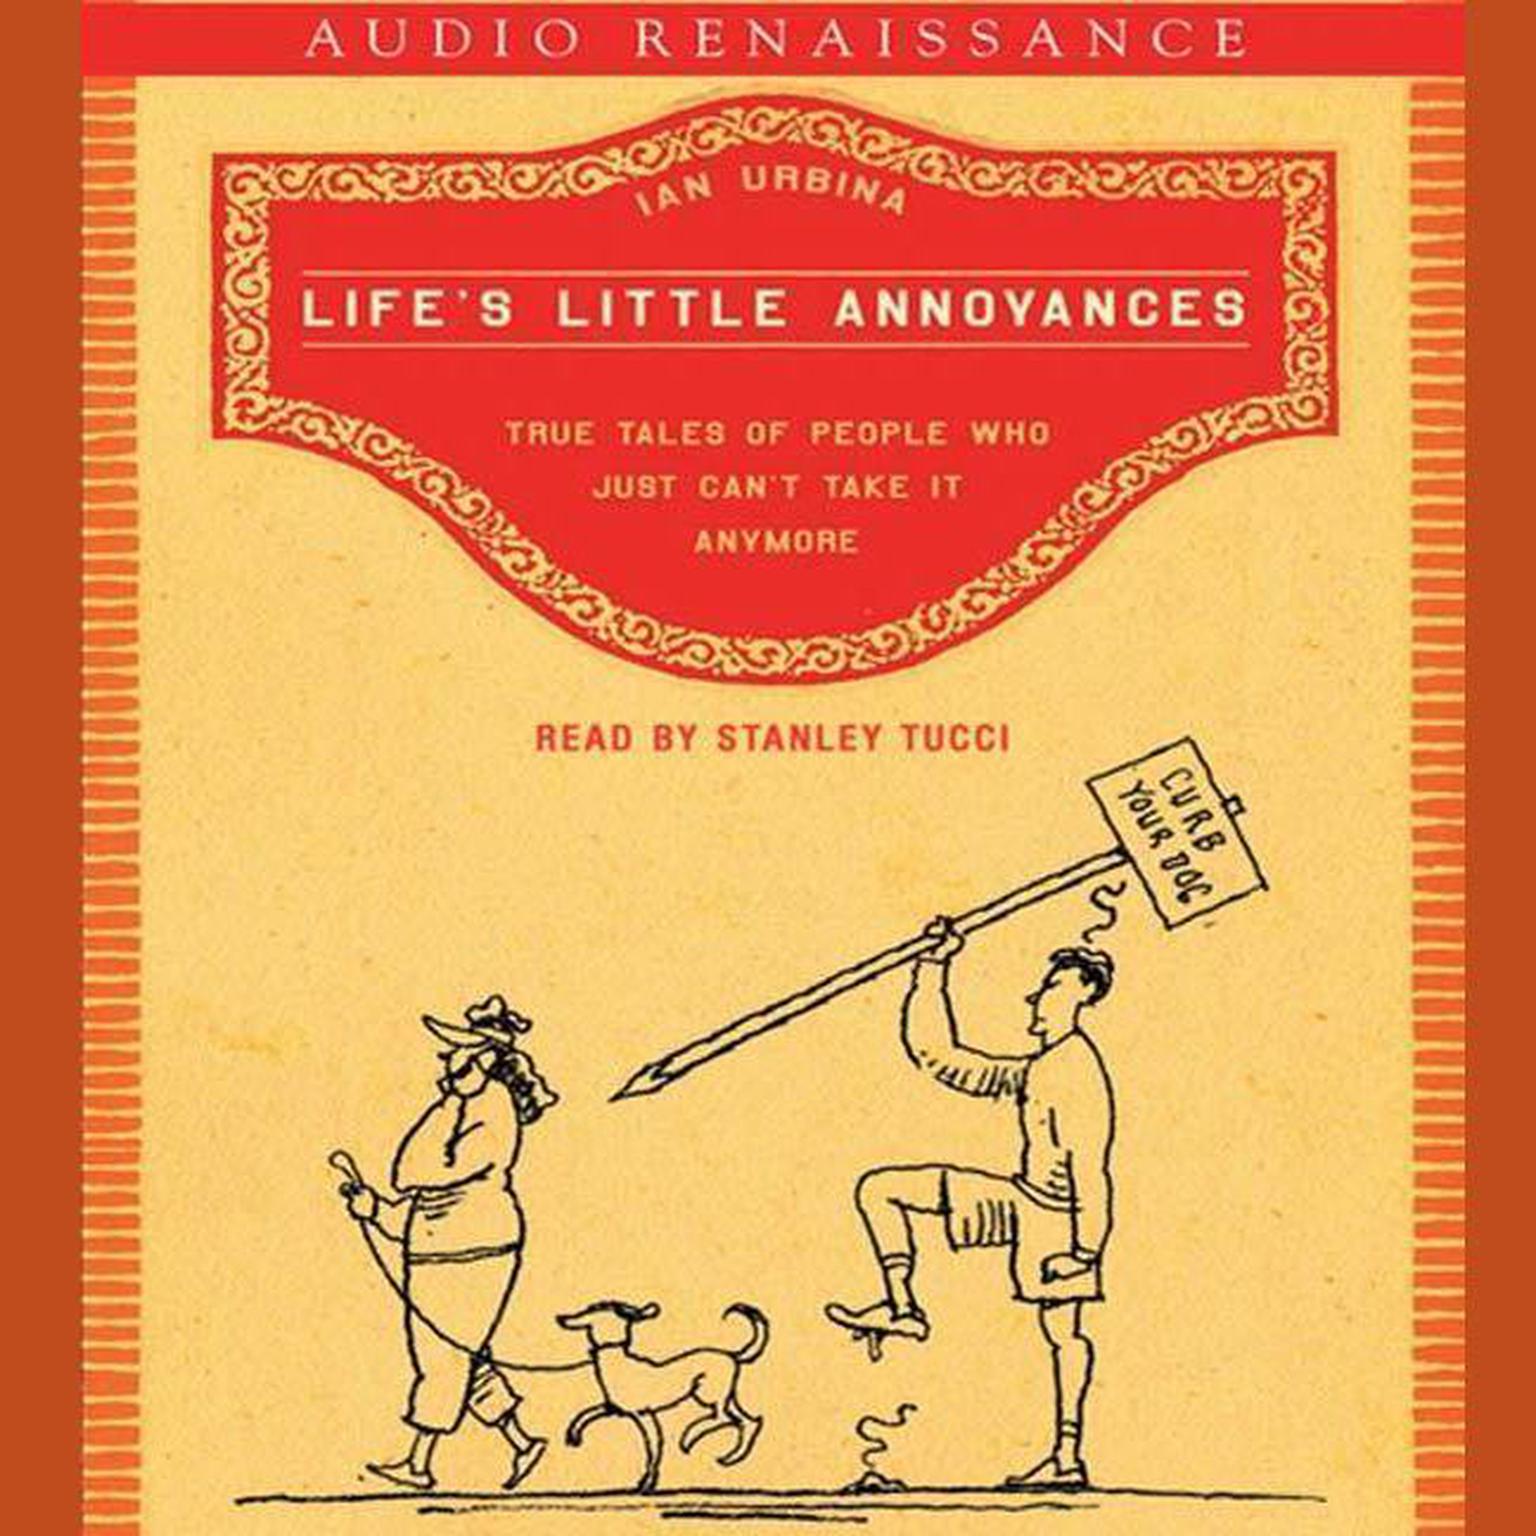 Lifes Little Annoyances (Abridged): True Tales of People Who Just Cant Take It Anymore Audiobook, by Ian Urbina